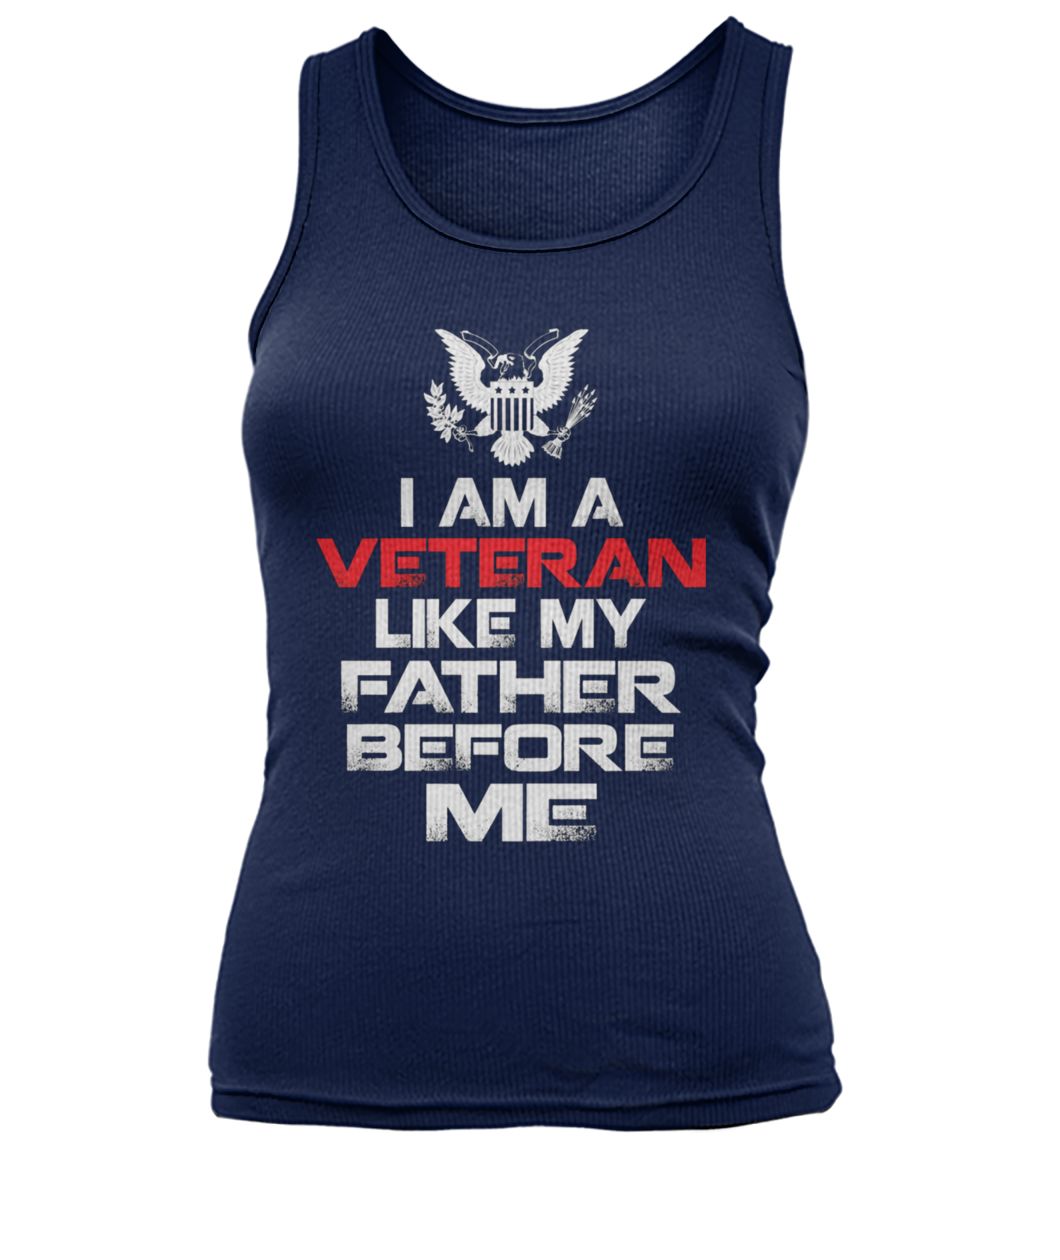 I am a veteran like my father before me women's tank top